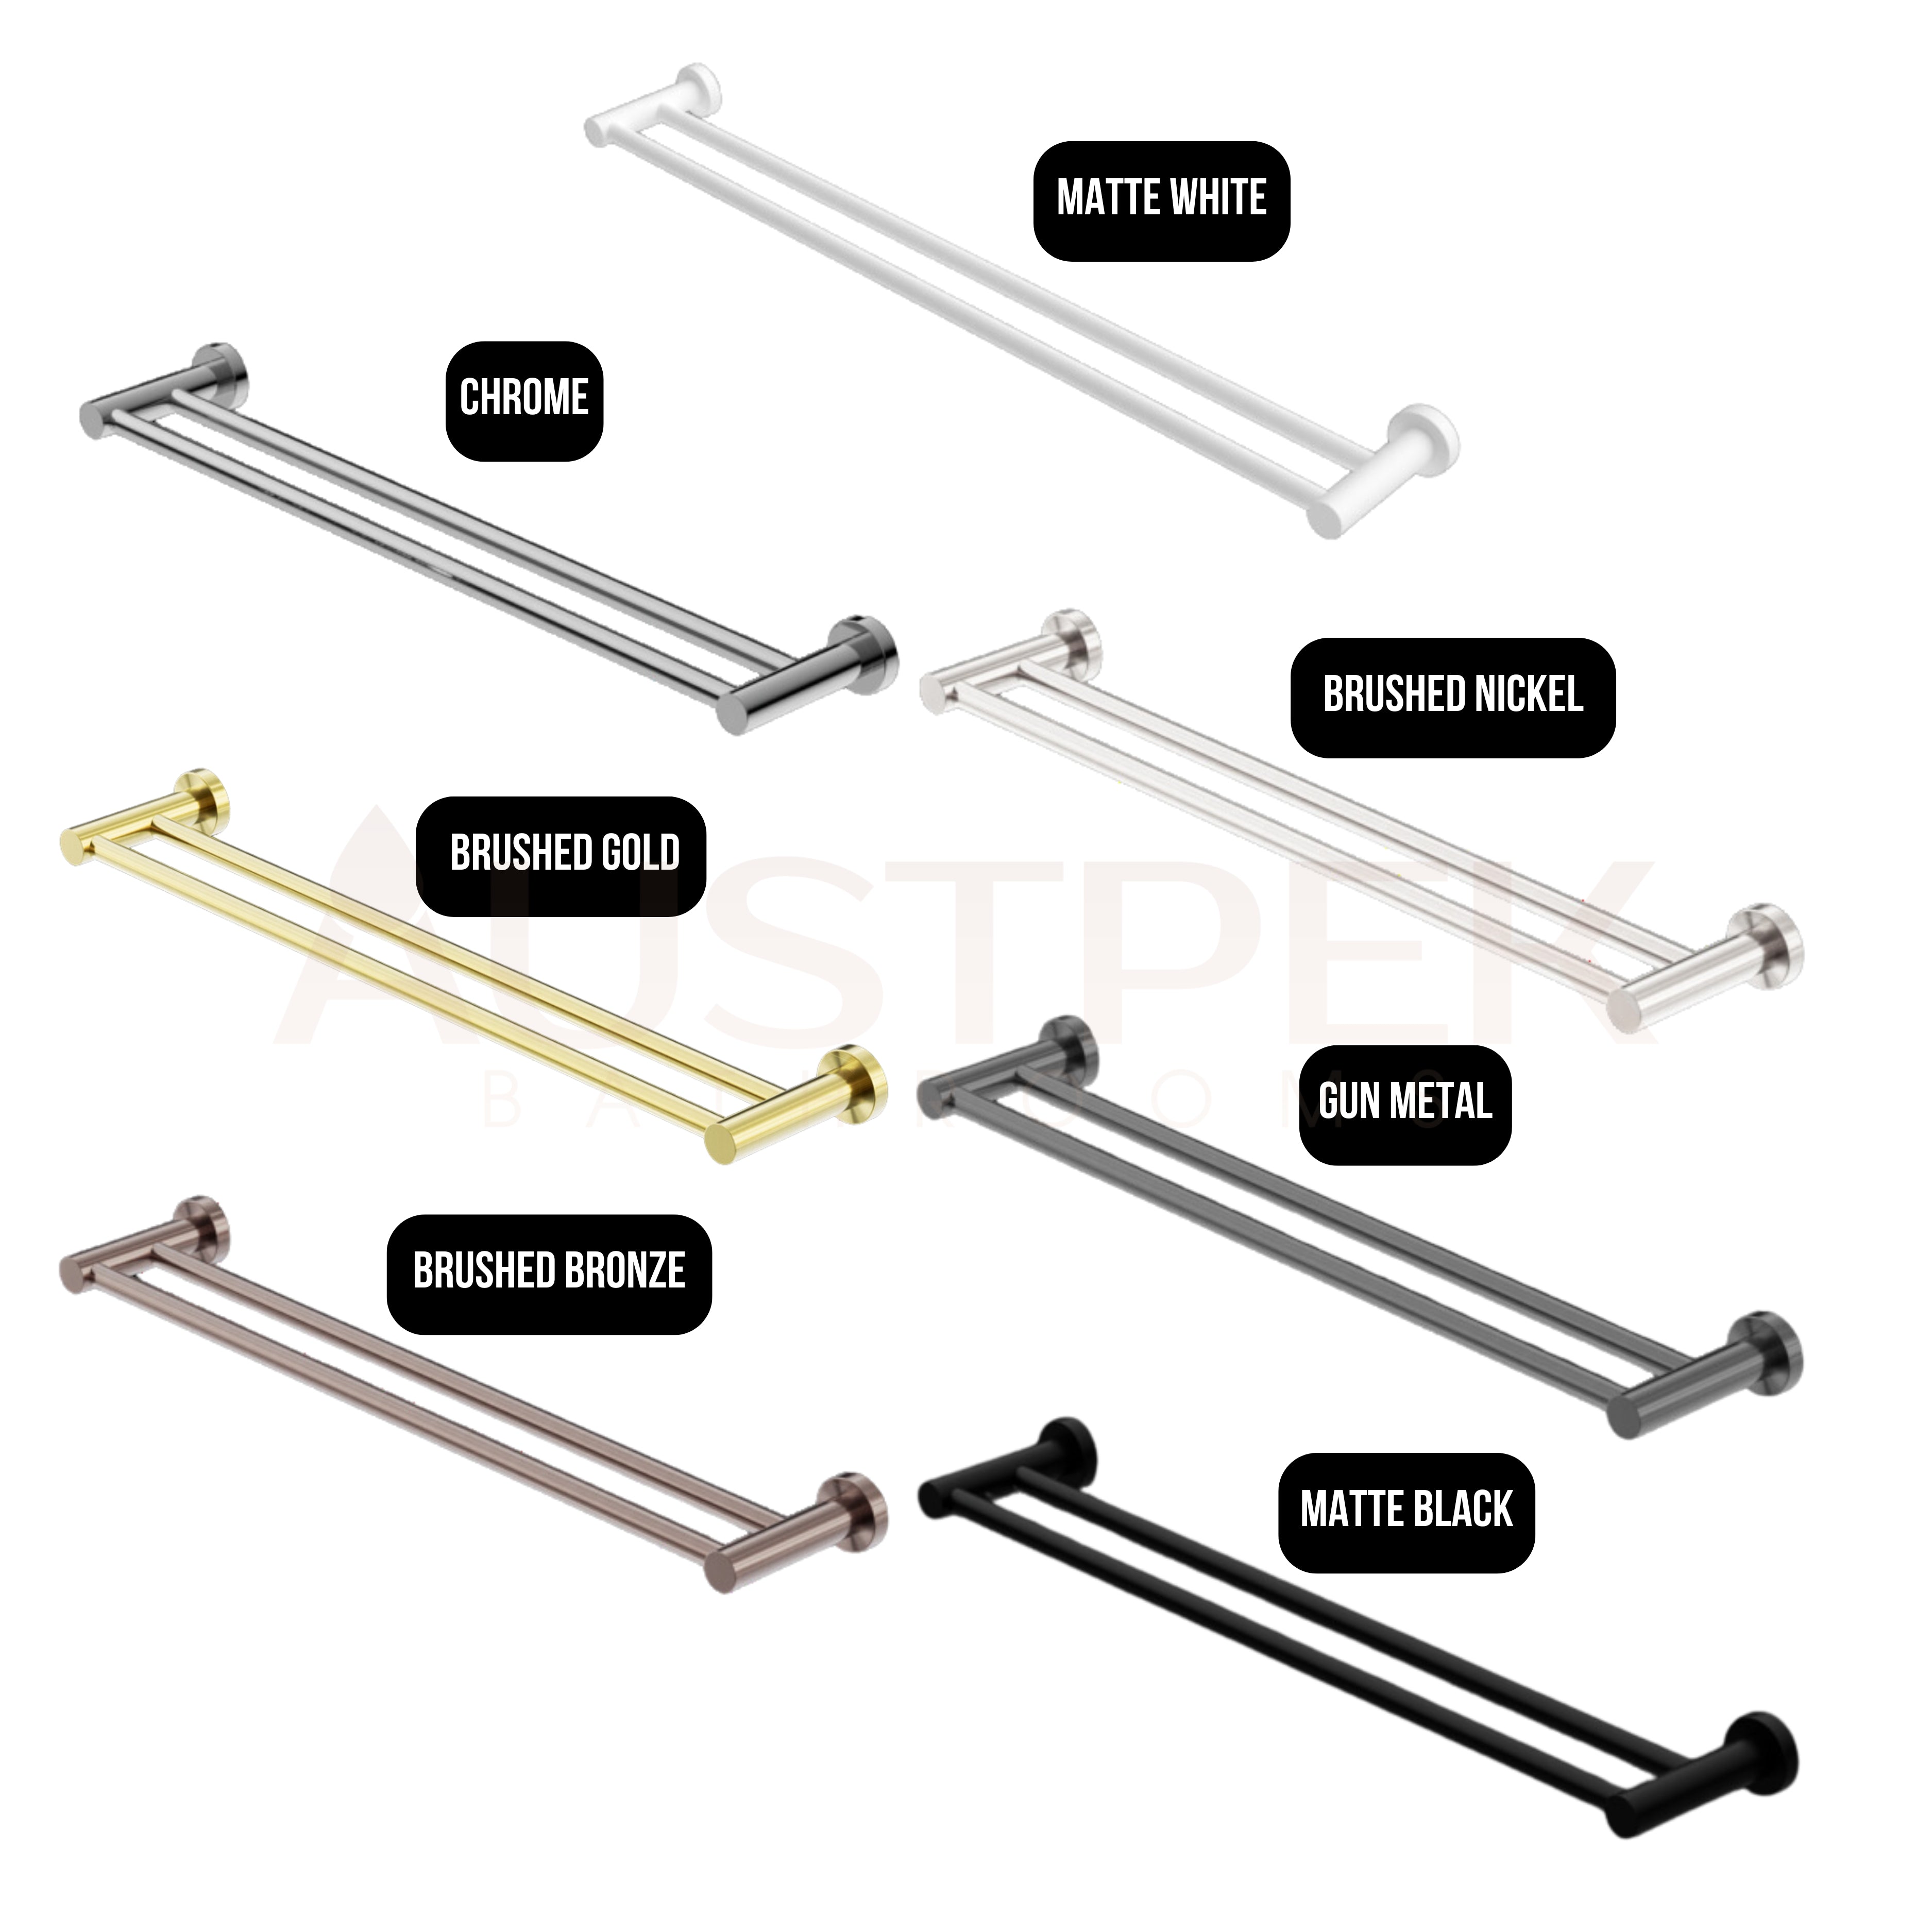 NERO MECCA DOUBLE NON-HEATED TOWEL RAIL BRUSHED GOLD (AVAILABLE IN 600MM AND 800MM)